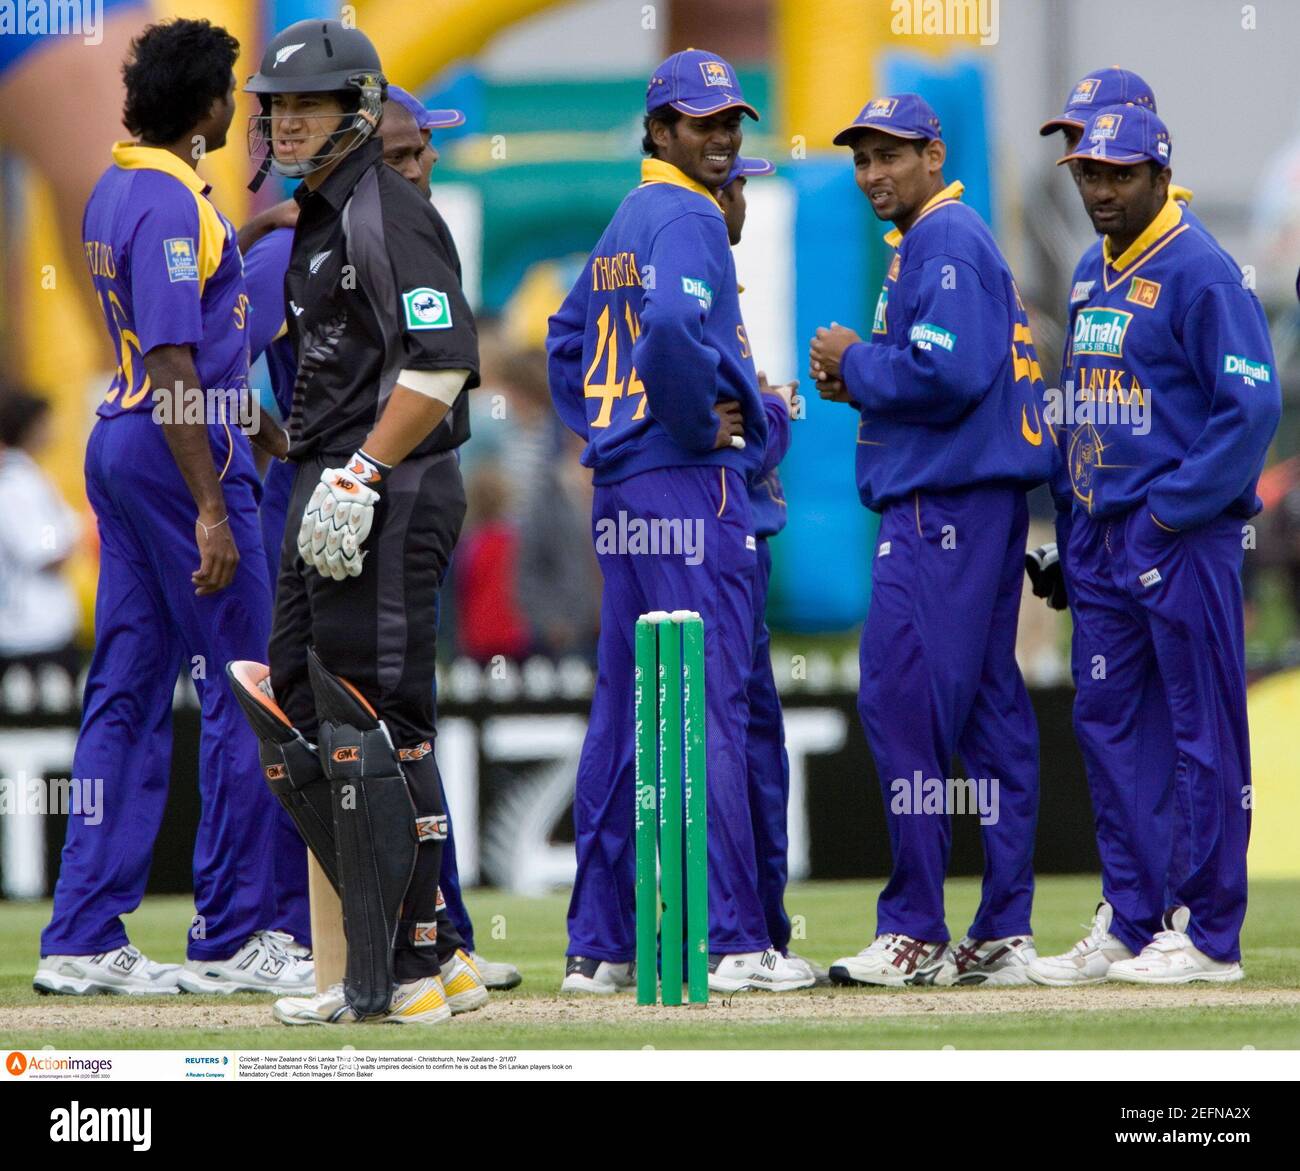 Cricket - New Zealand v Sri Lanka Third One Day International - Christchurch, New Zealand - 2/1/07  New Zealand batsman Ross Taylor (2nd L) waits umpires decision to confirm he is out as the Sri Lankan players look on  Mandatory Credit : Action Images / Simon Baker Stock Photo